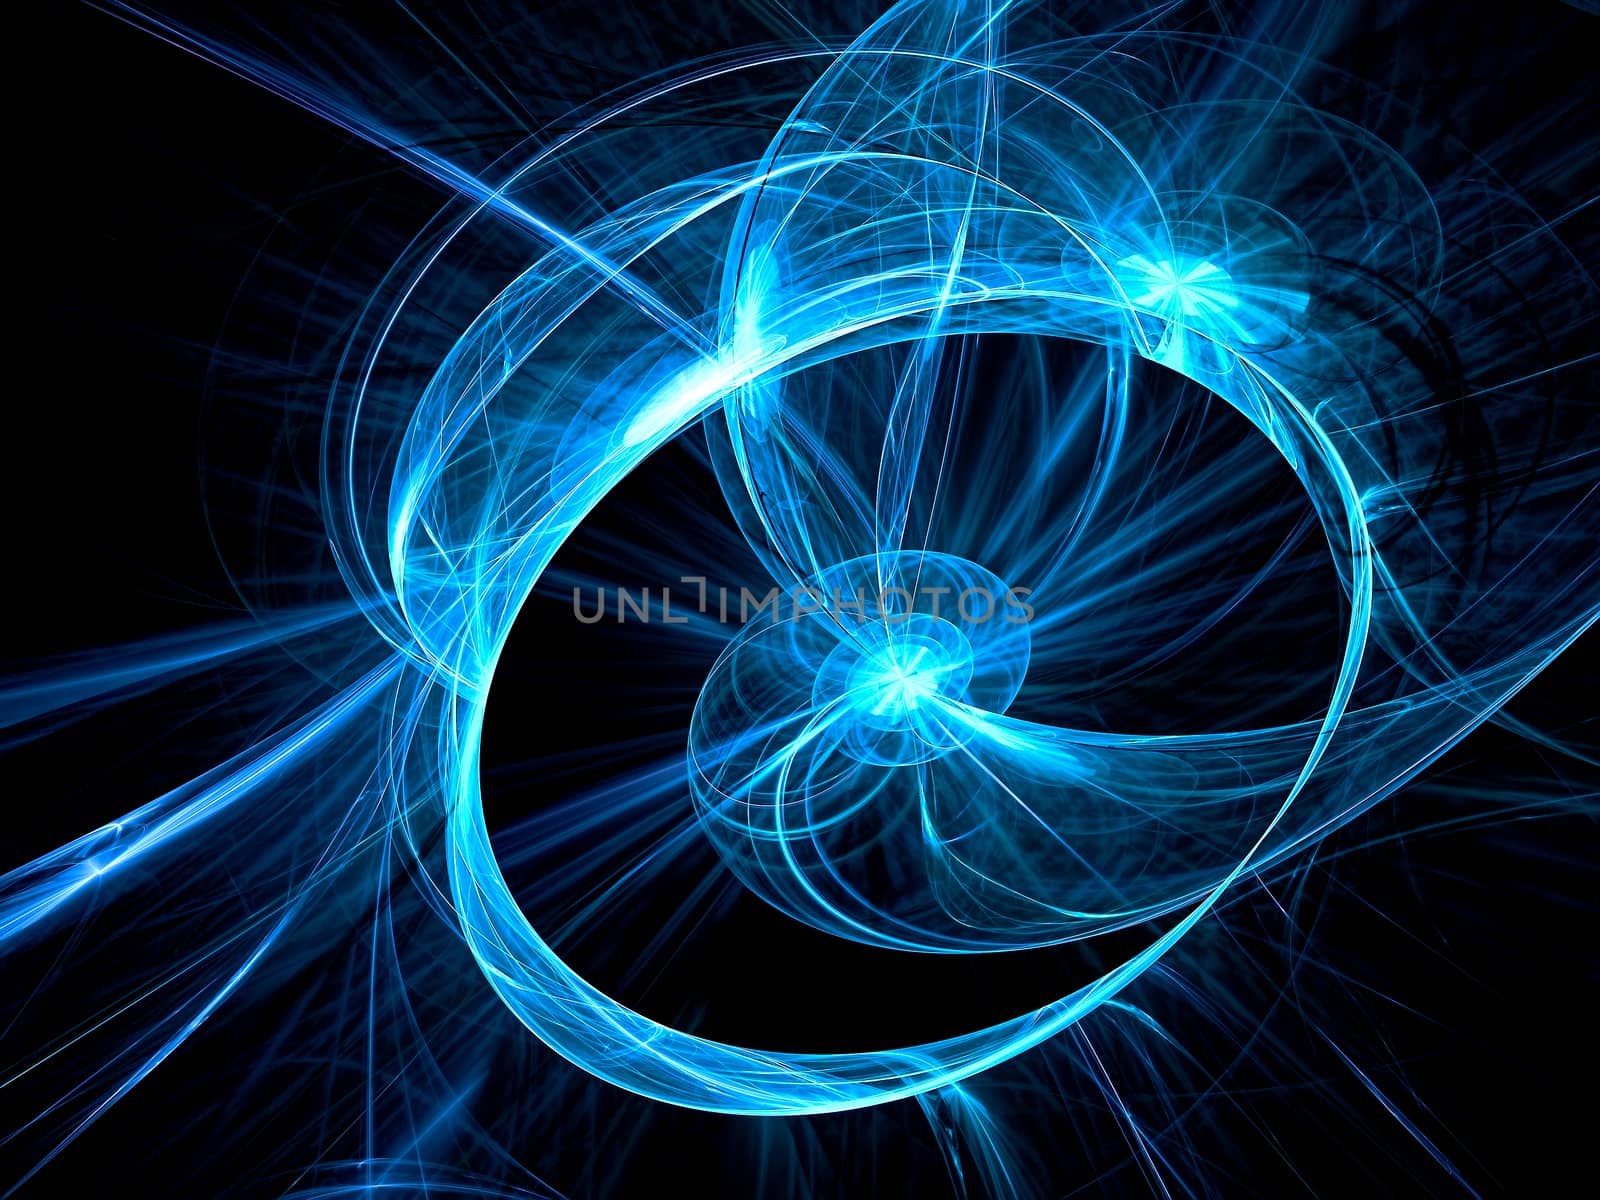 Technology or sci-fi background - abstract computer-generated image. Fractal art: luminous design round shape like glowing wheel. For covers, web design, posters.